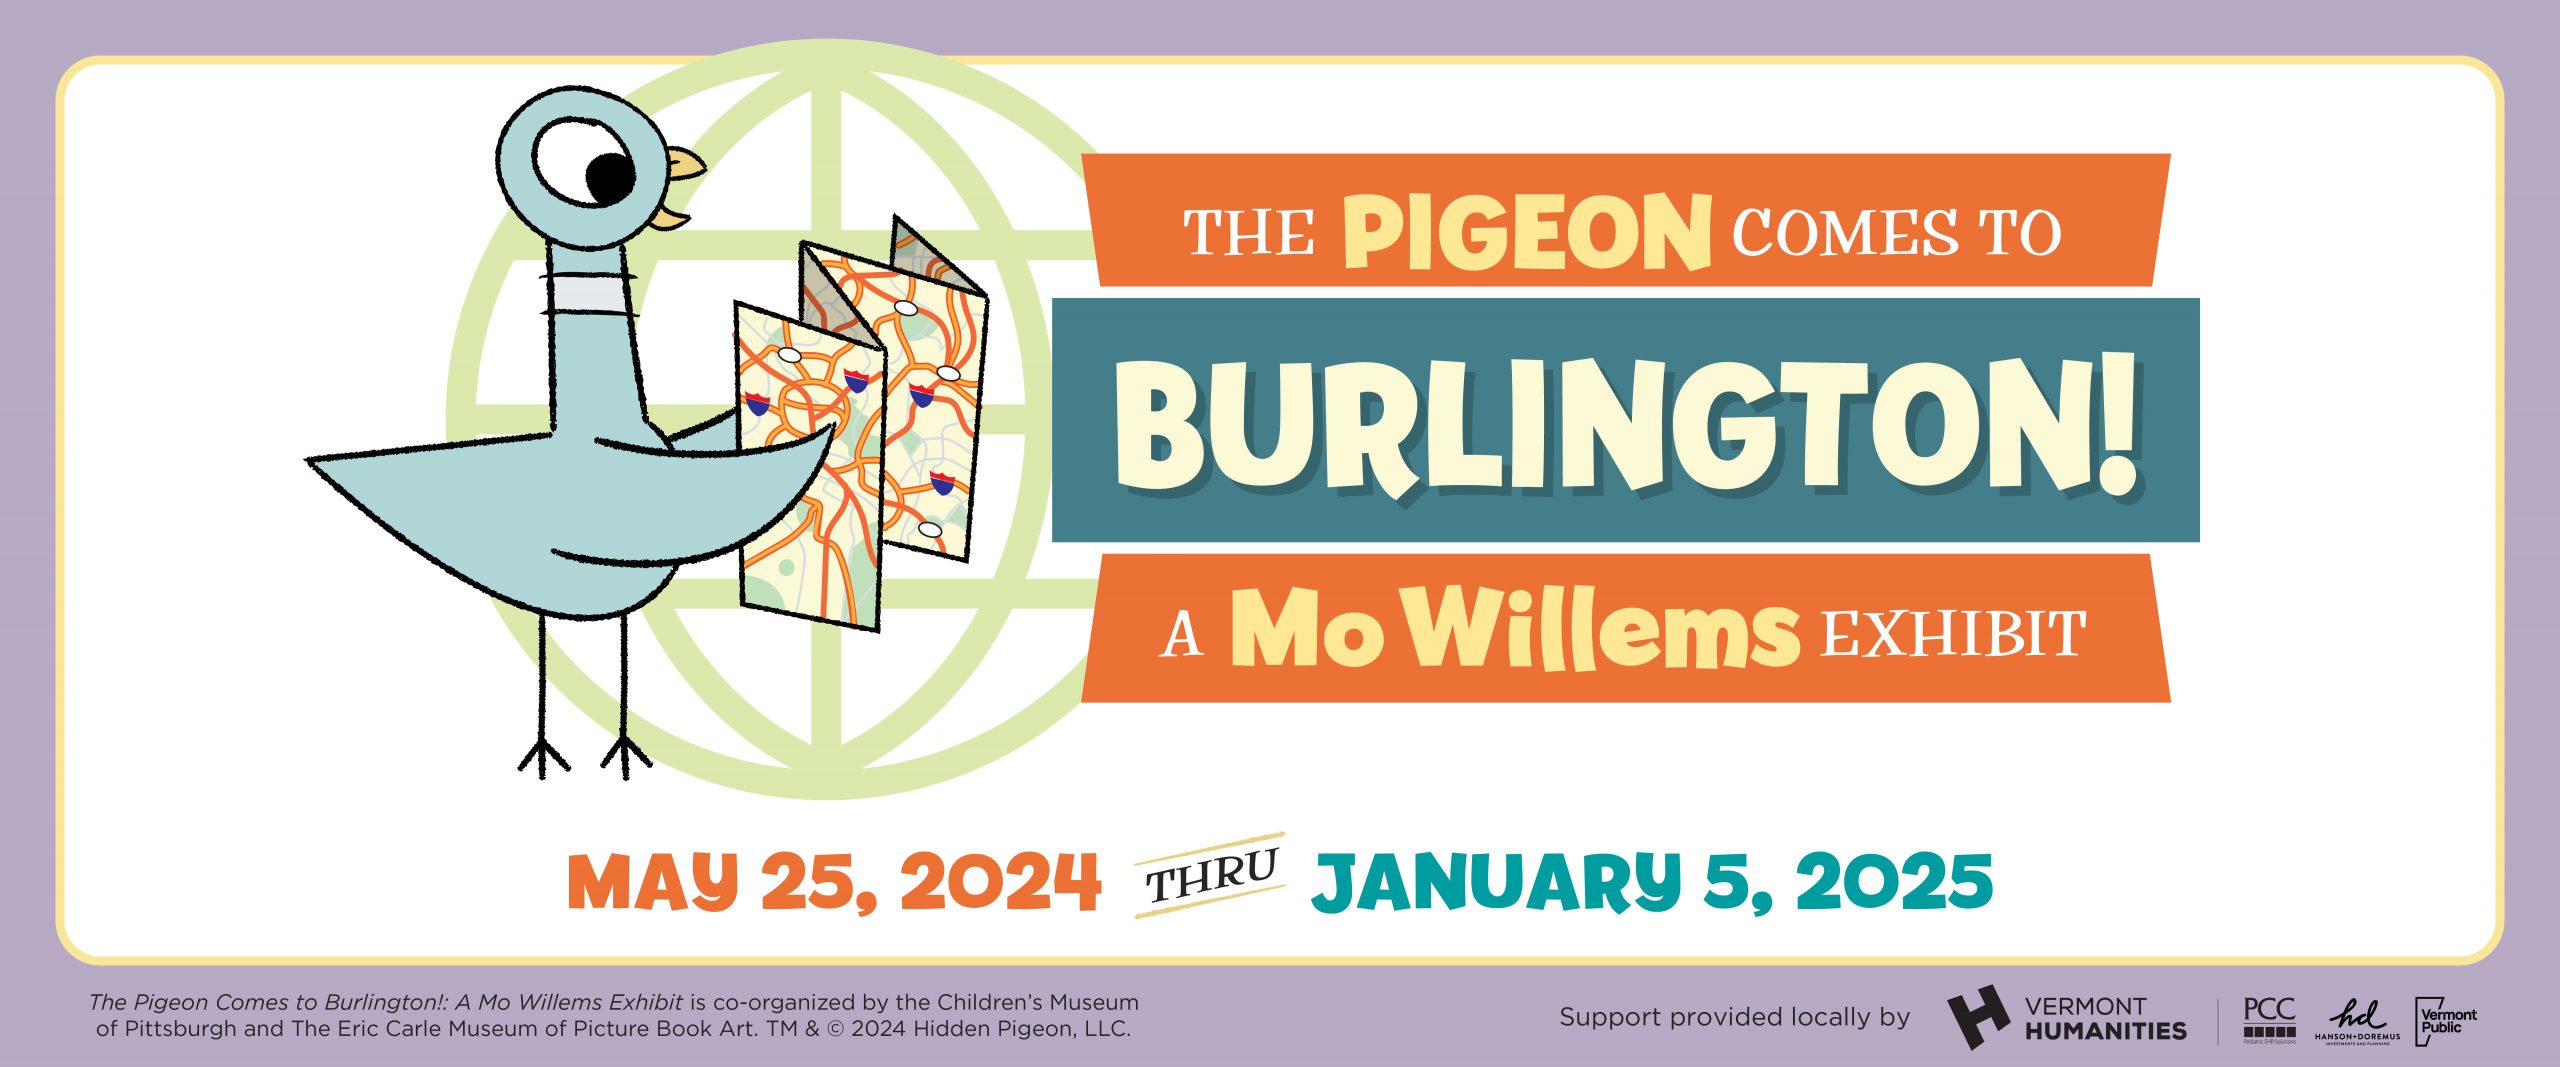 Exhibit logo for "The Pigeon Comes to Burlington! A Mo Willems Exhibit." Text below reads May 25, 2024 thru January 5, 2025. Sponsor logos and credit line in fine text at bottom.